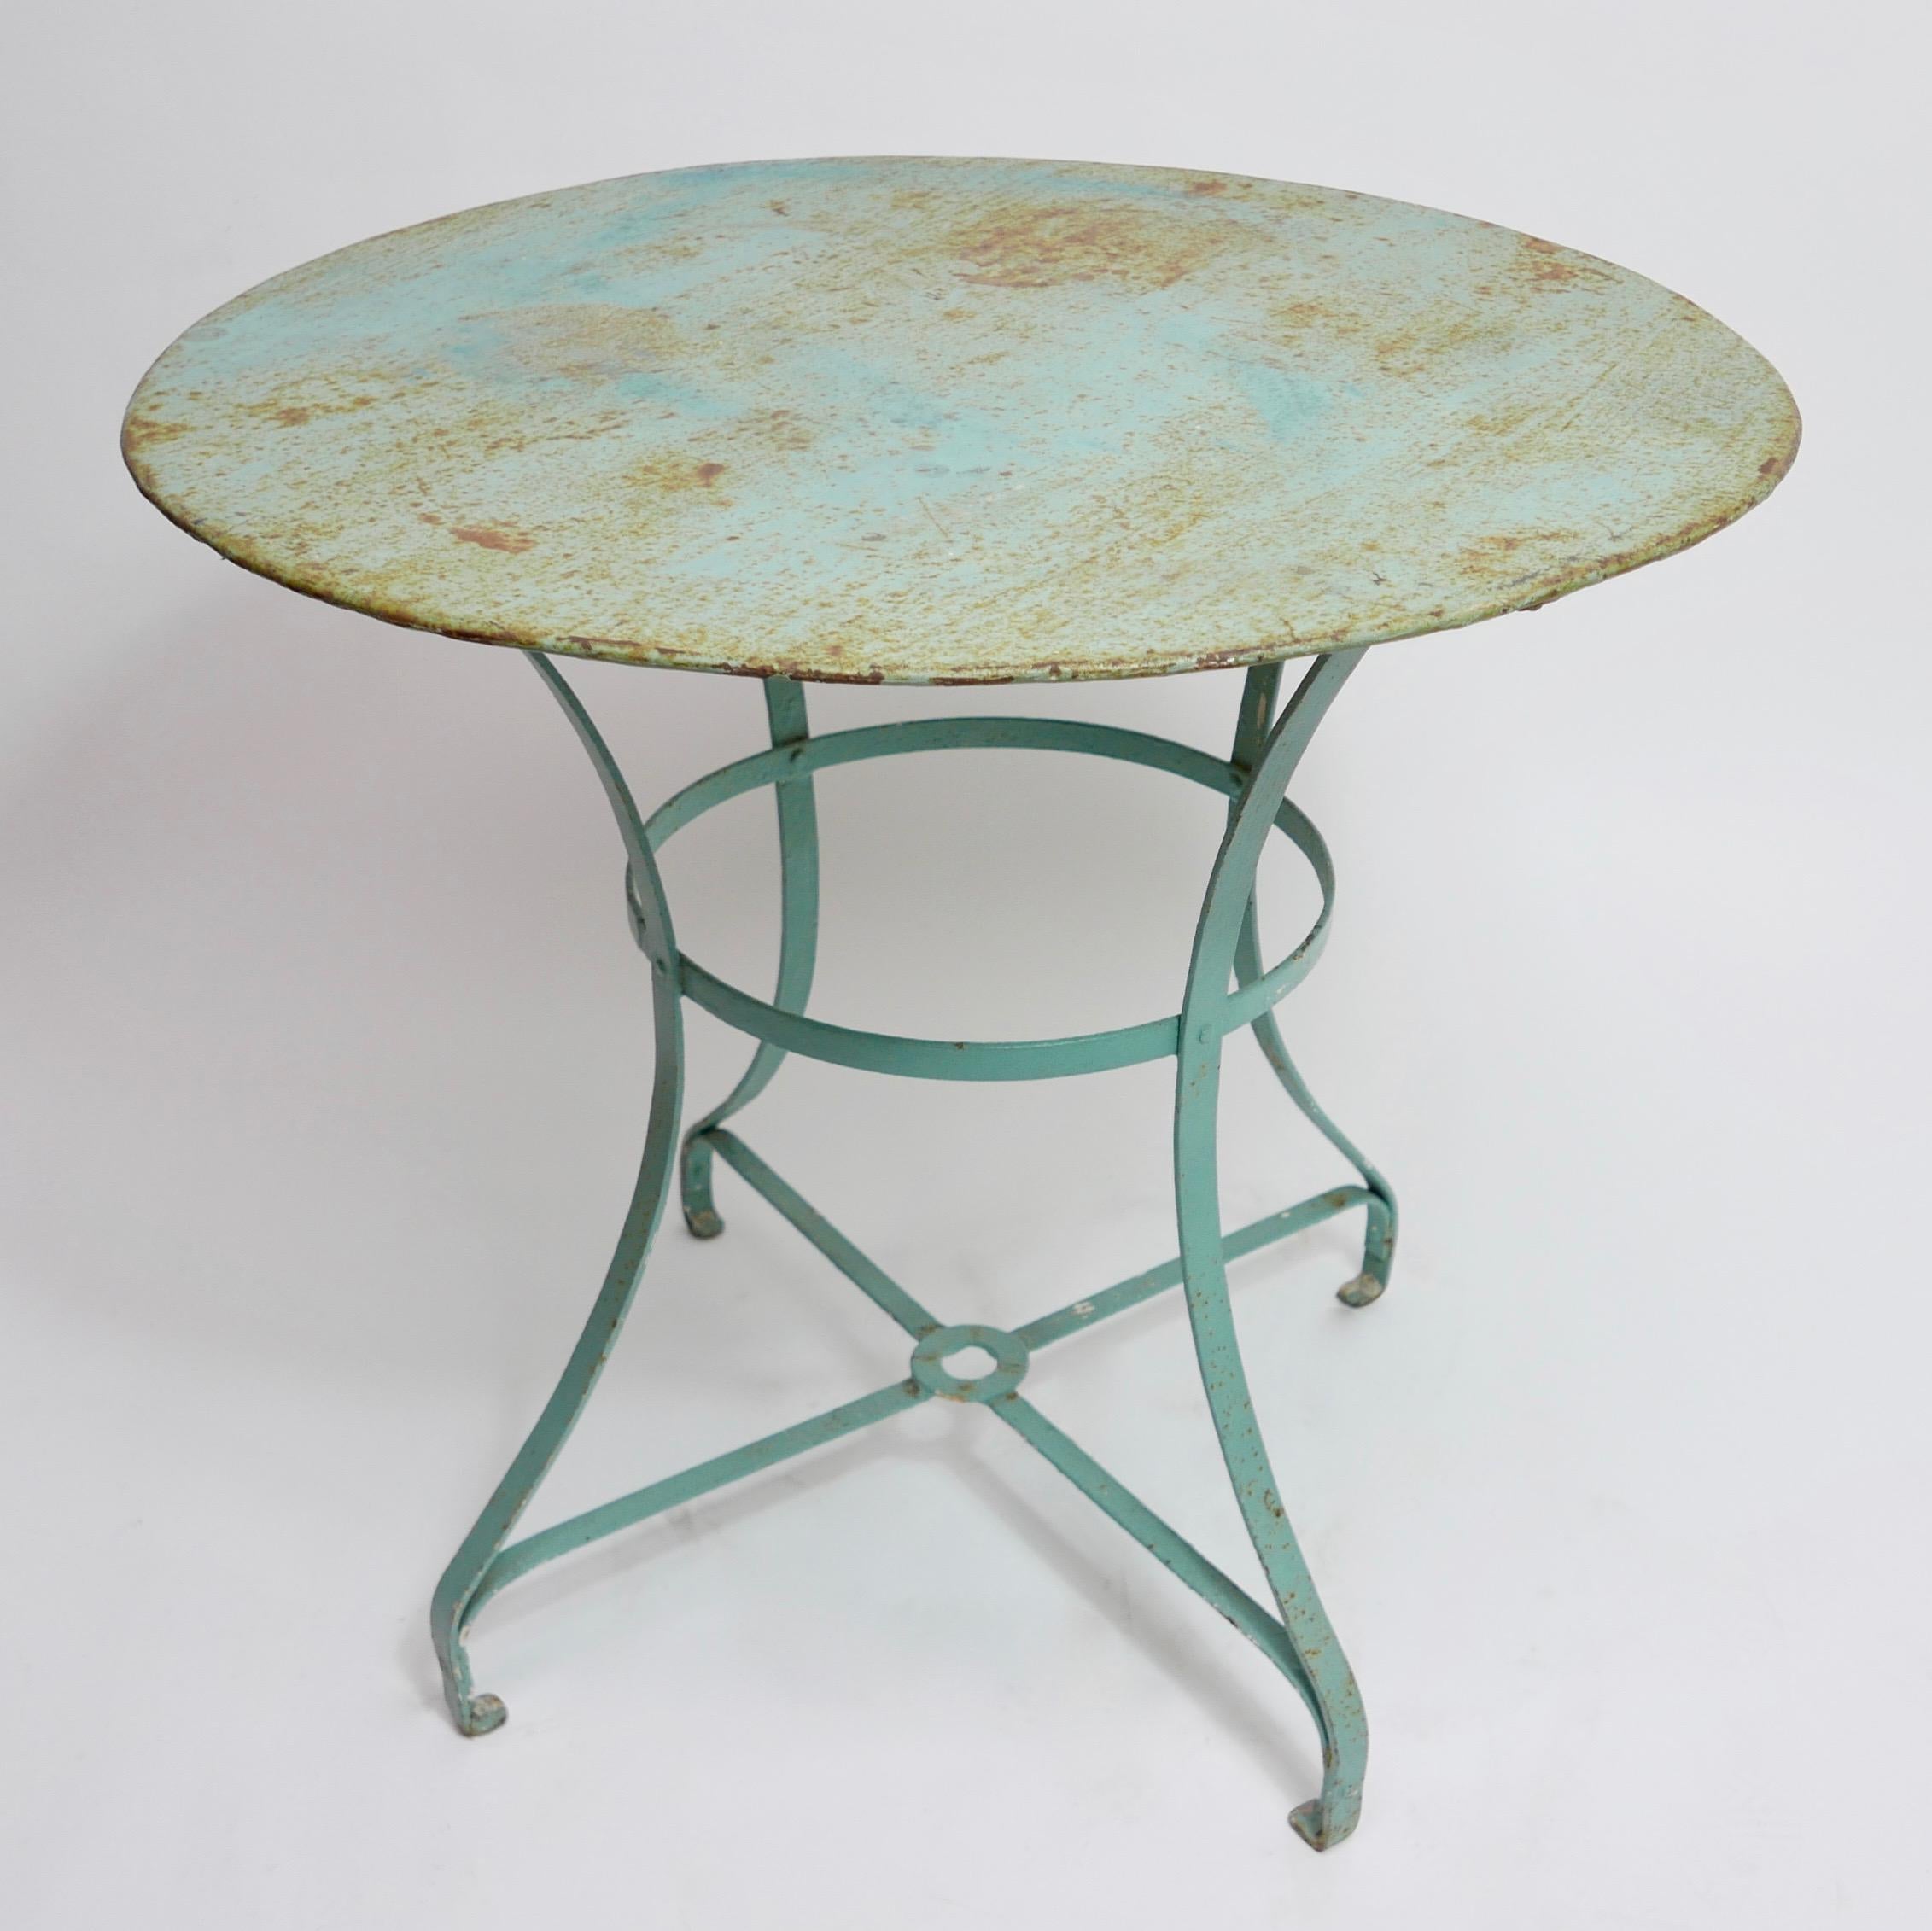 Metal garden or bistro table with beautifully aged and weathered turquoise paint, France. Early to mid-20th century.